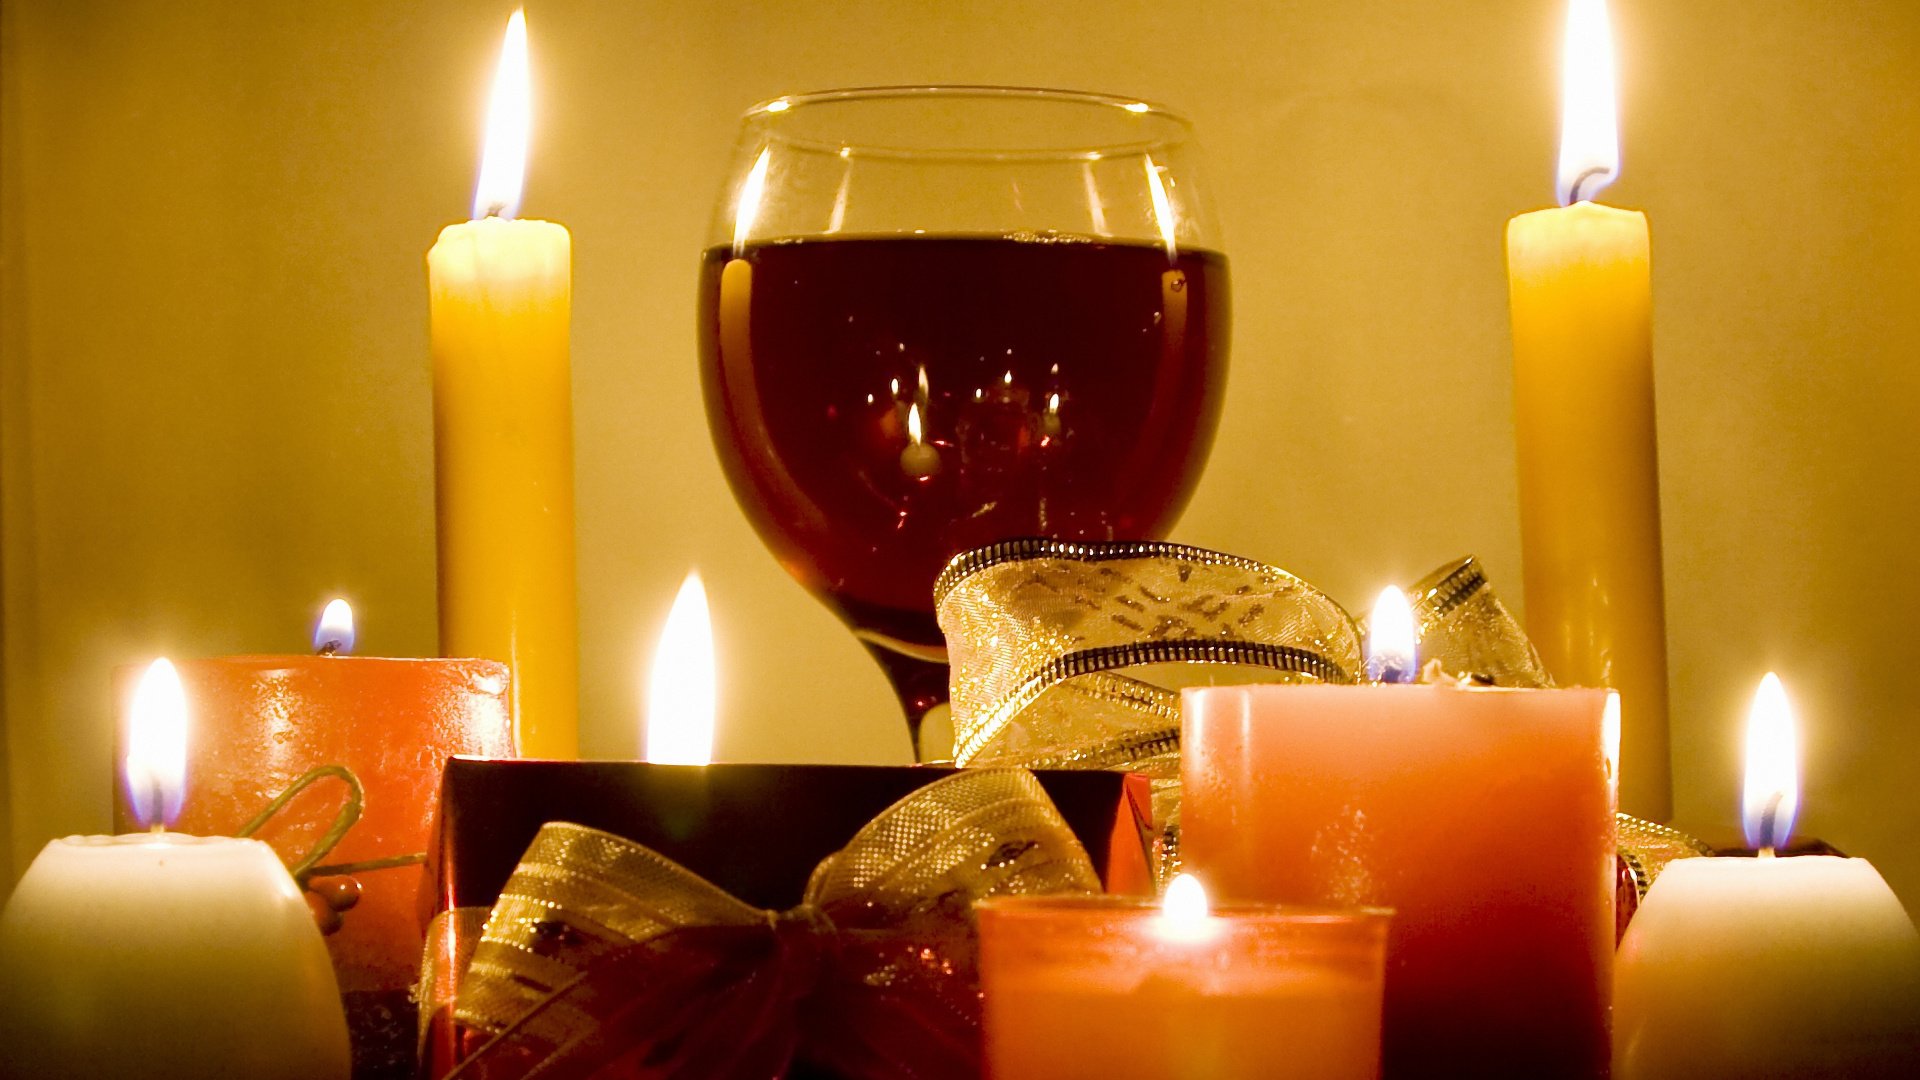 Wine, Candle, Lighting, Wax, Still Life. Wallpaper in 1920x1080 Resolution